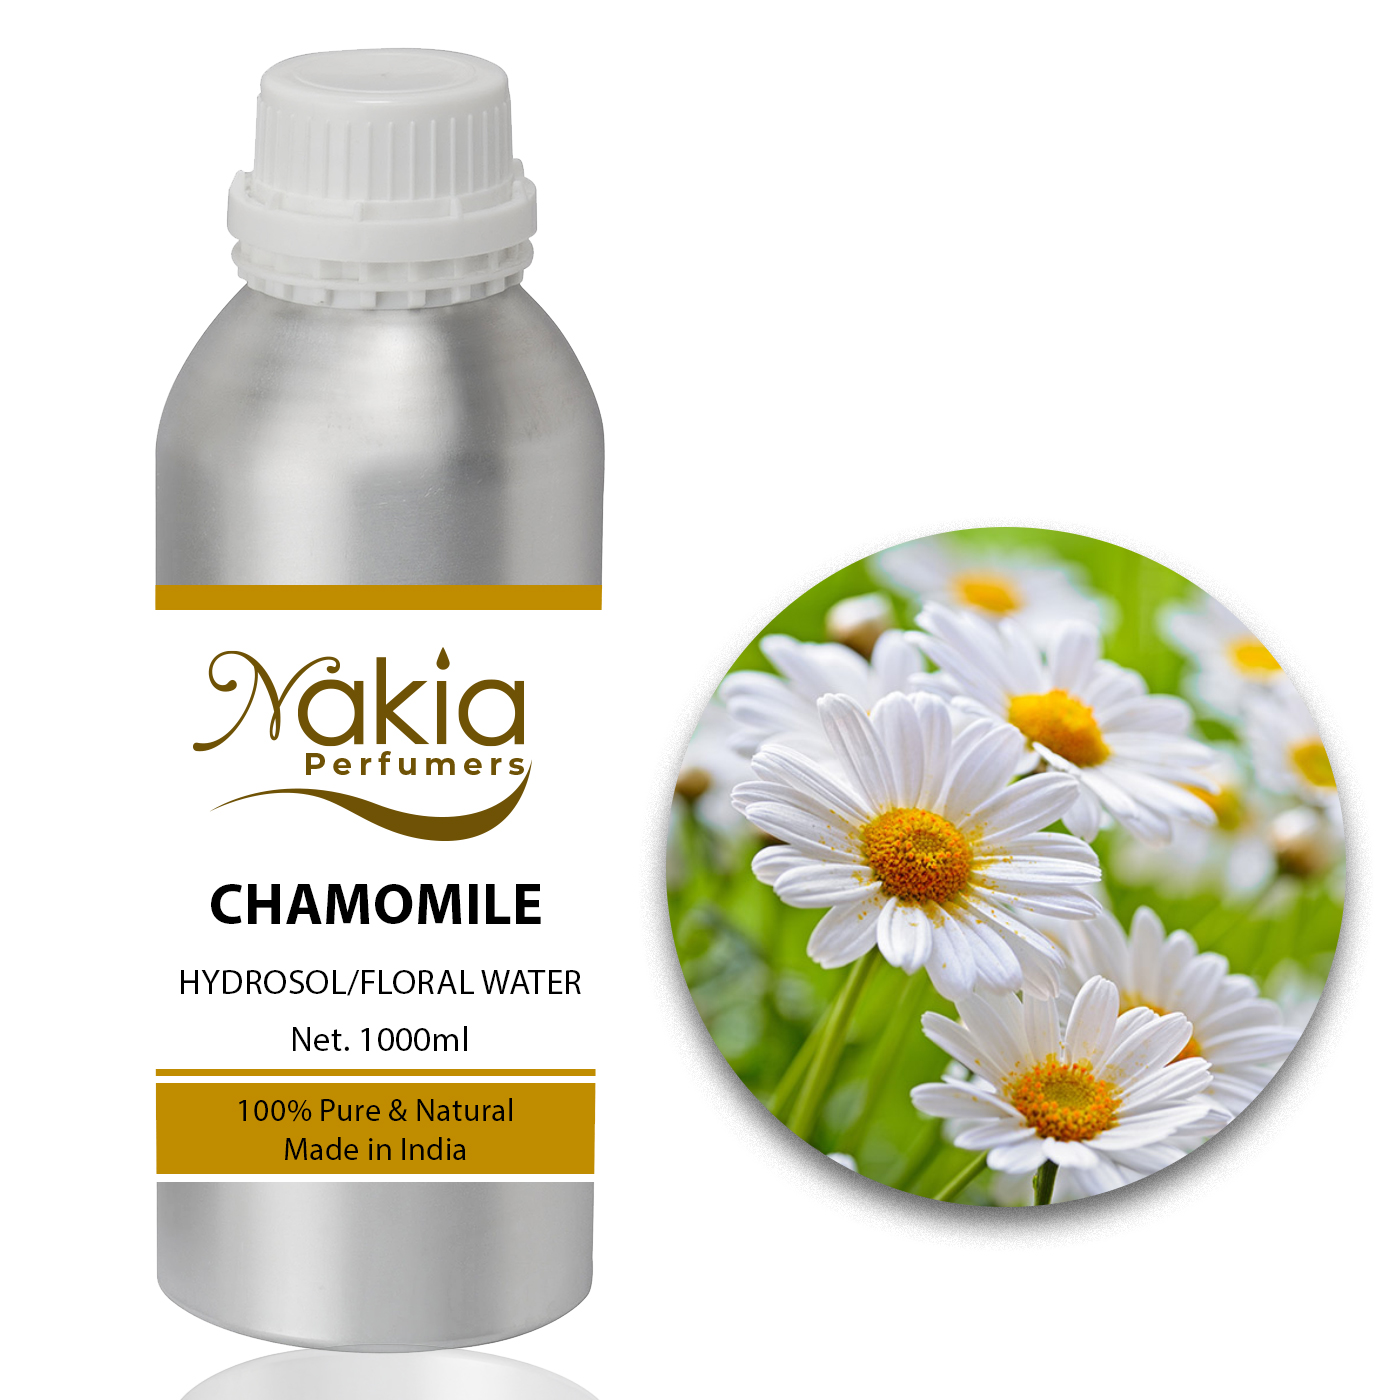 CHAMOMILE FLORAL WATER/HYDROSOL